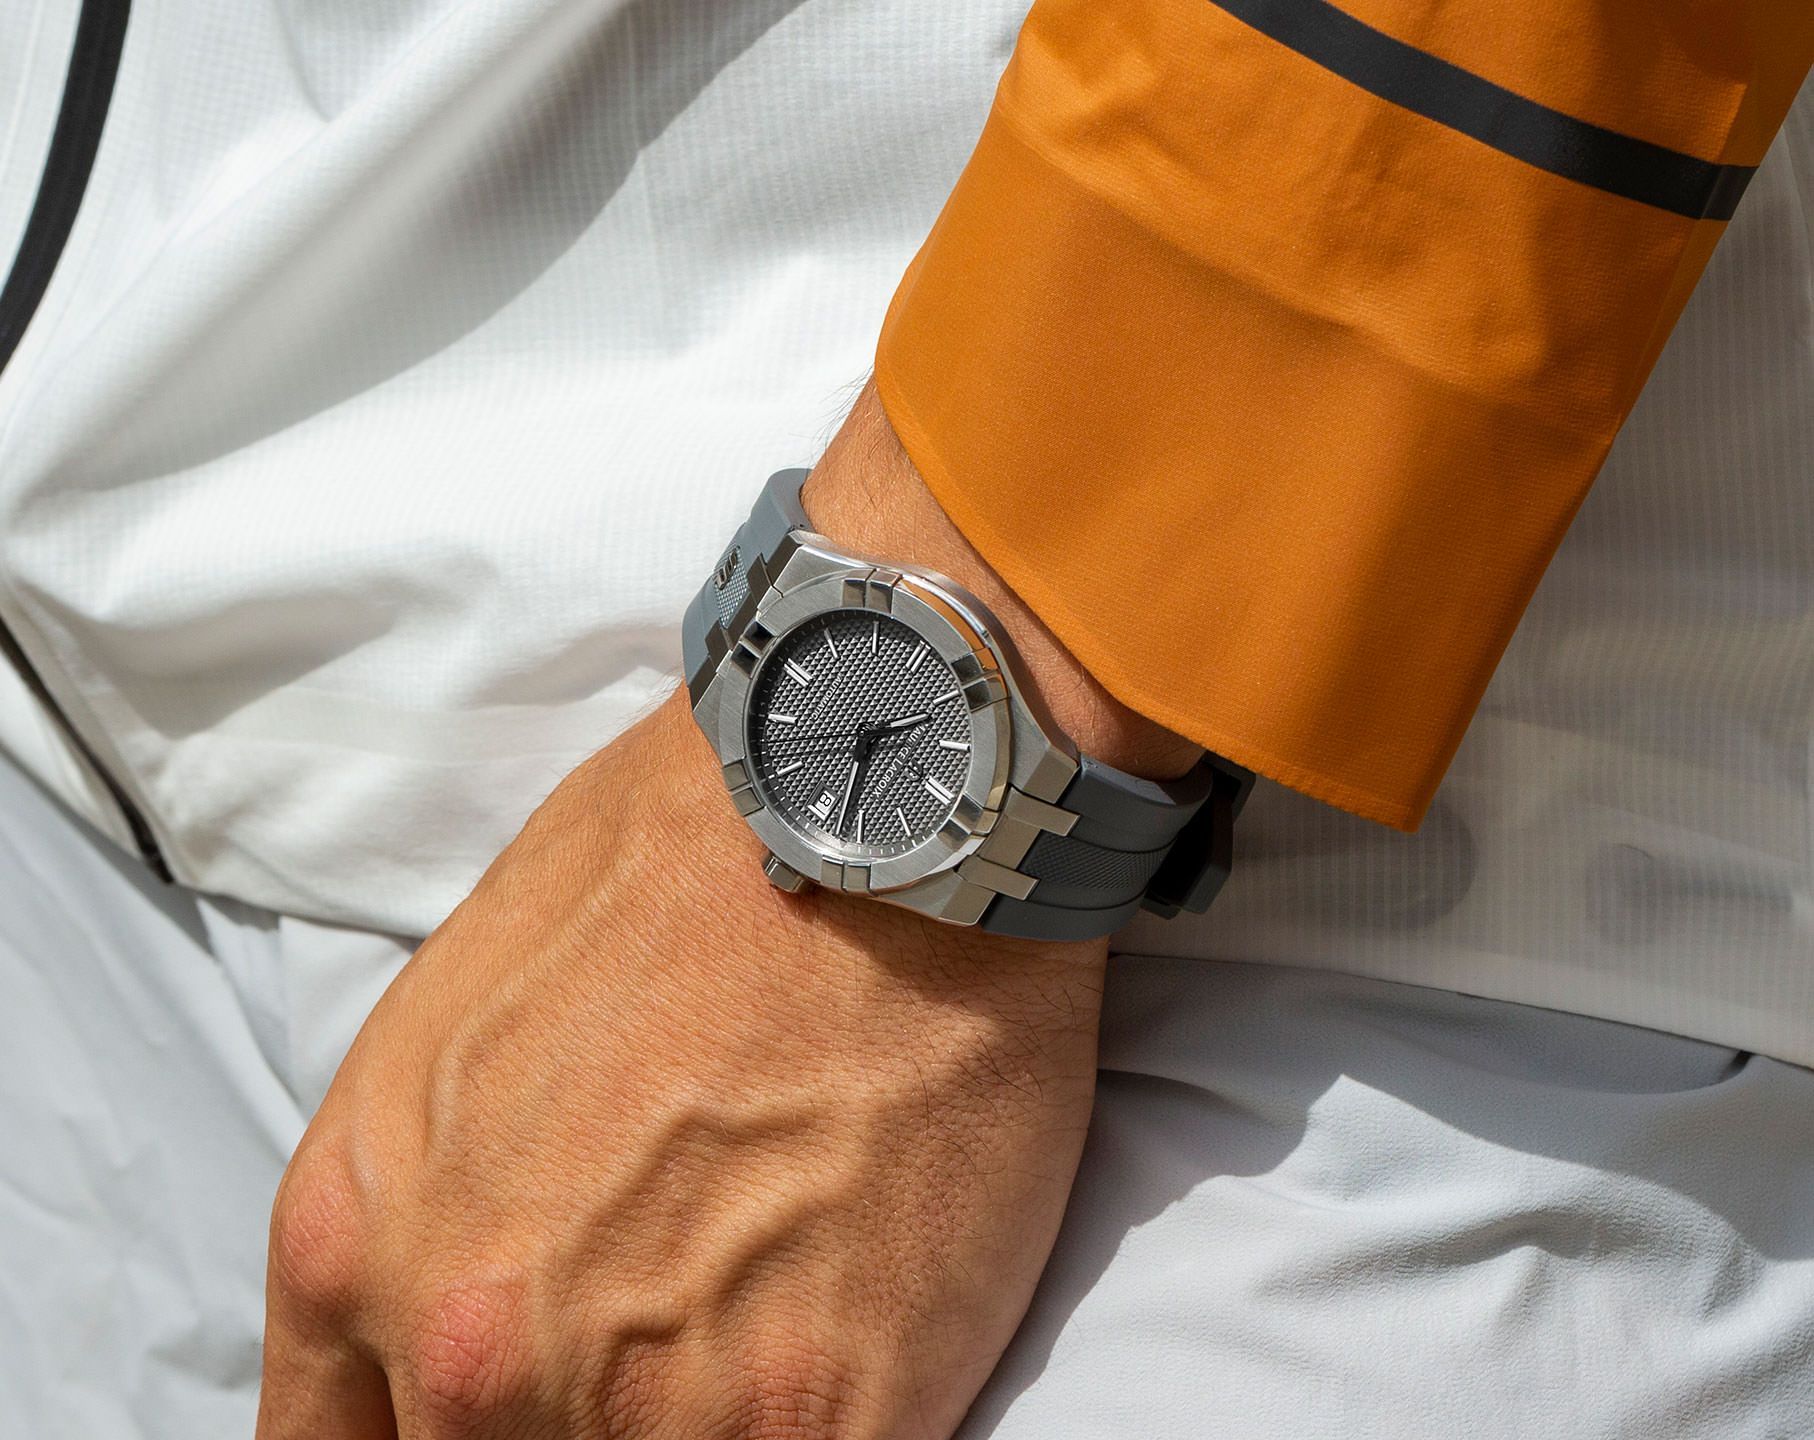 Maurice Lacroix Aikon Automatic 42 mm Watch in Grey Dial